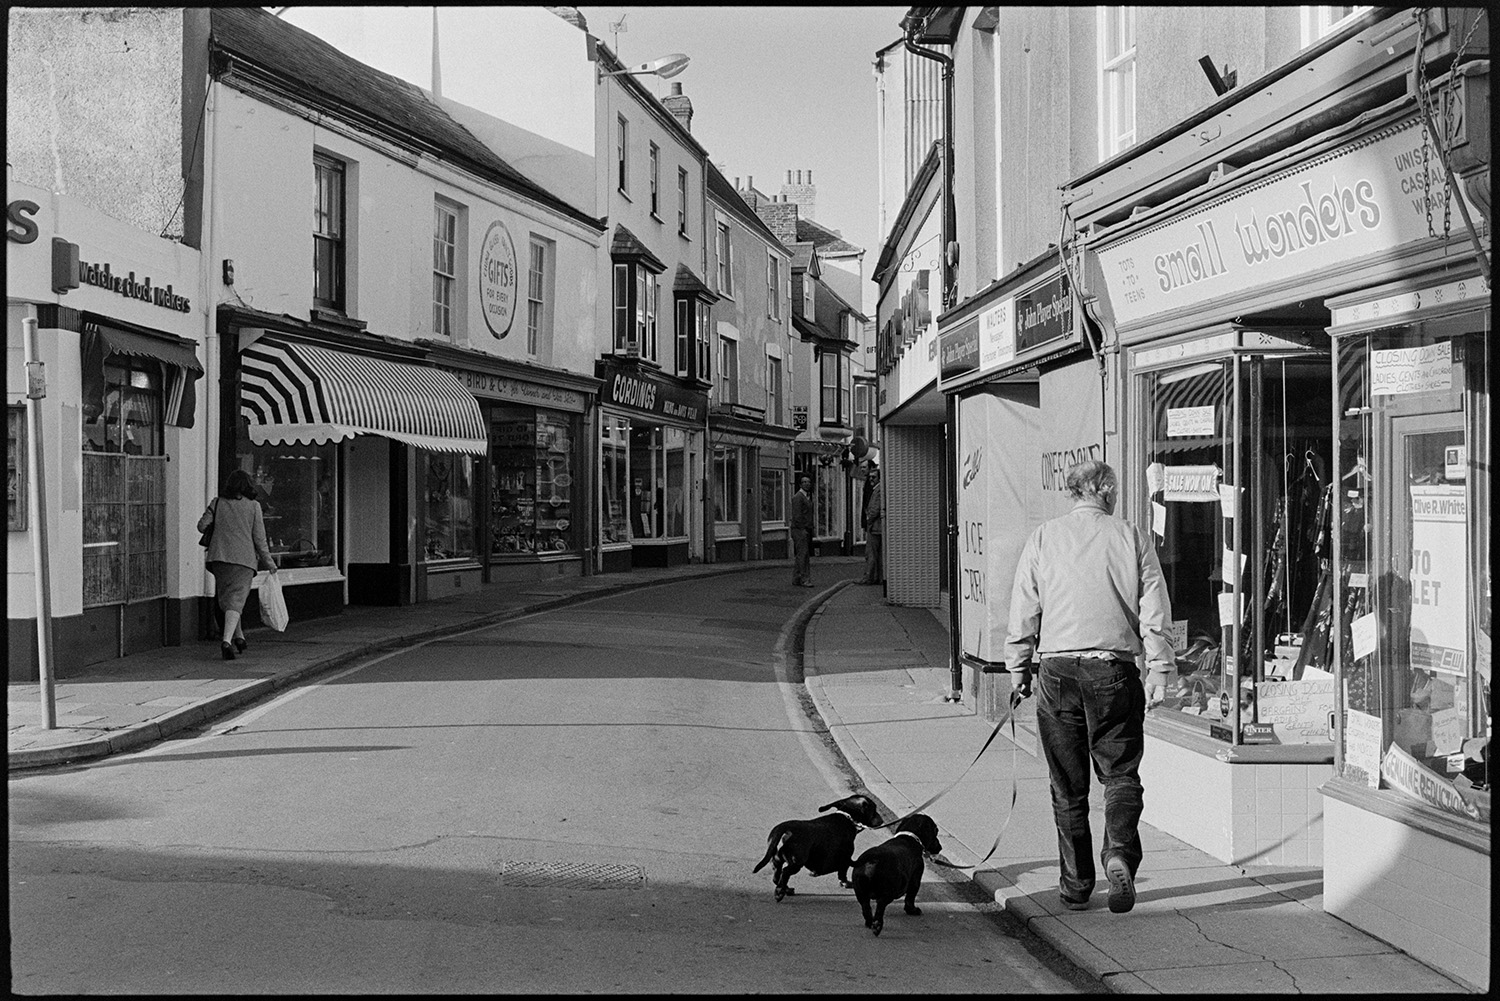 Street scenes with shop fronts, window display of clothes shop. 
[A man walking along Mill Street, Bideford with two dogs. He is passing 'Small Wonders' toyshop. Other shop front s are visible, including Cordings.]